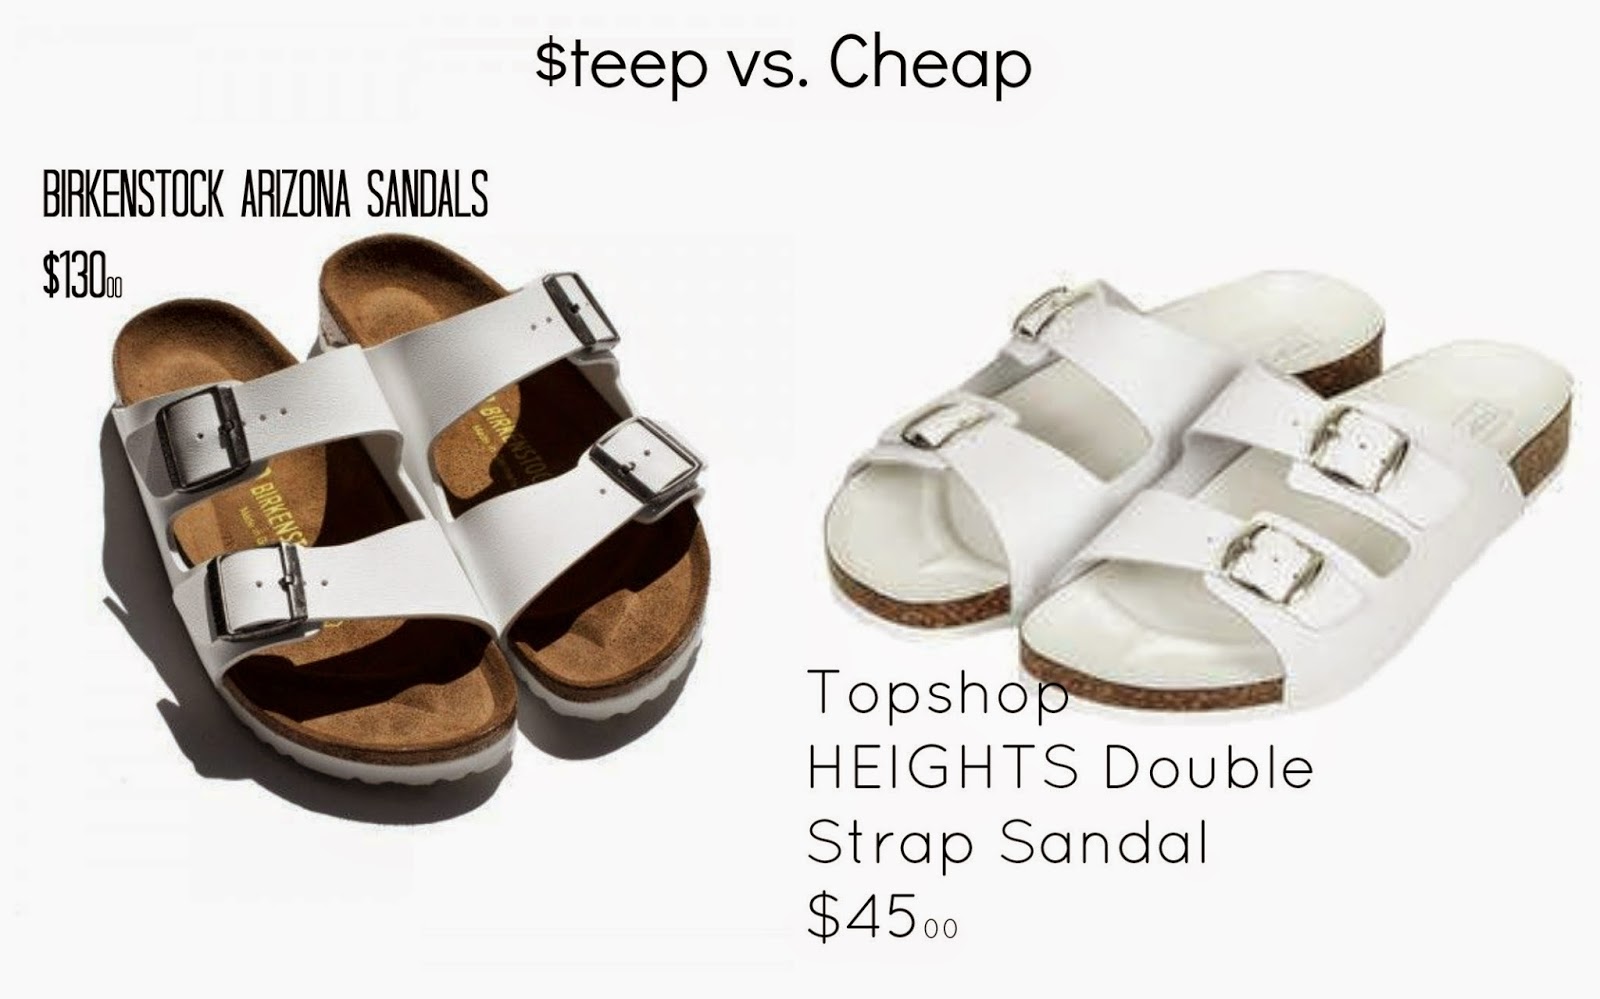 ... SpadeNY to name a few), but my favorite knock off is from Topshop